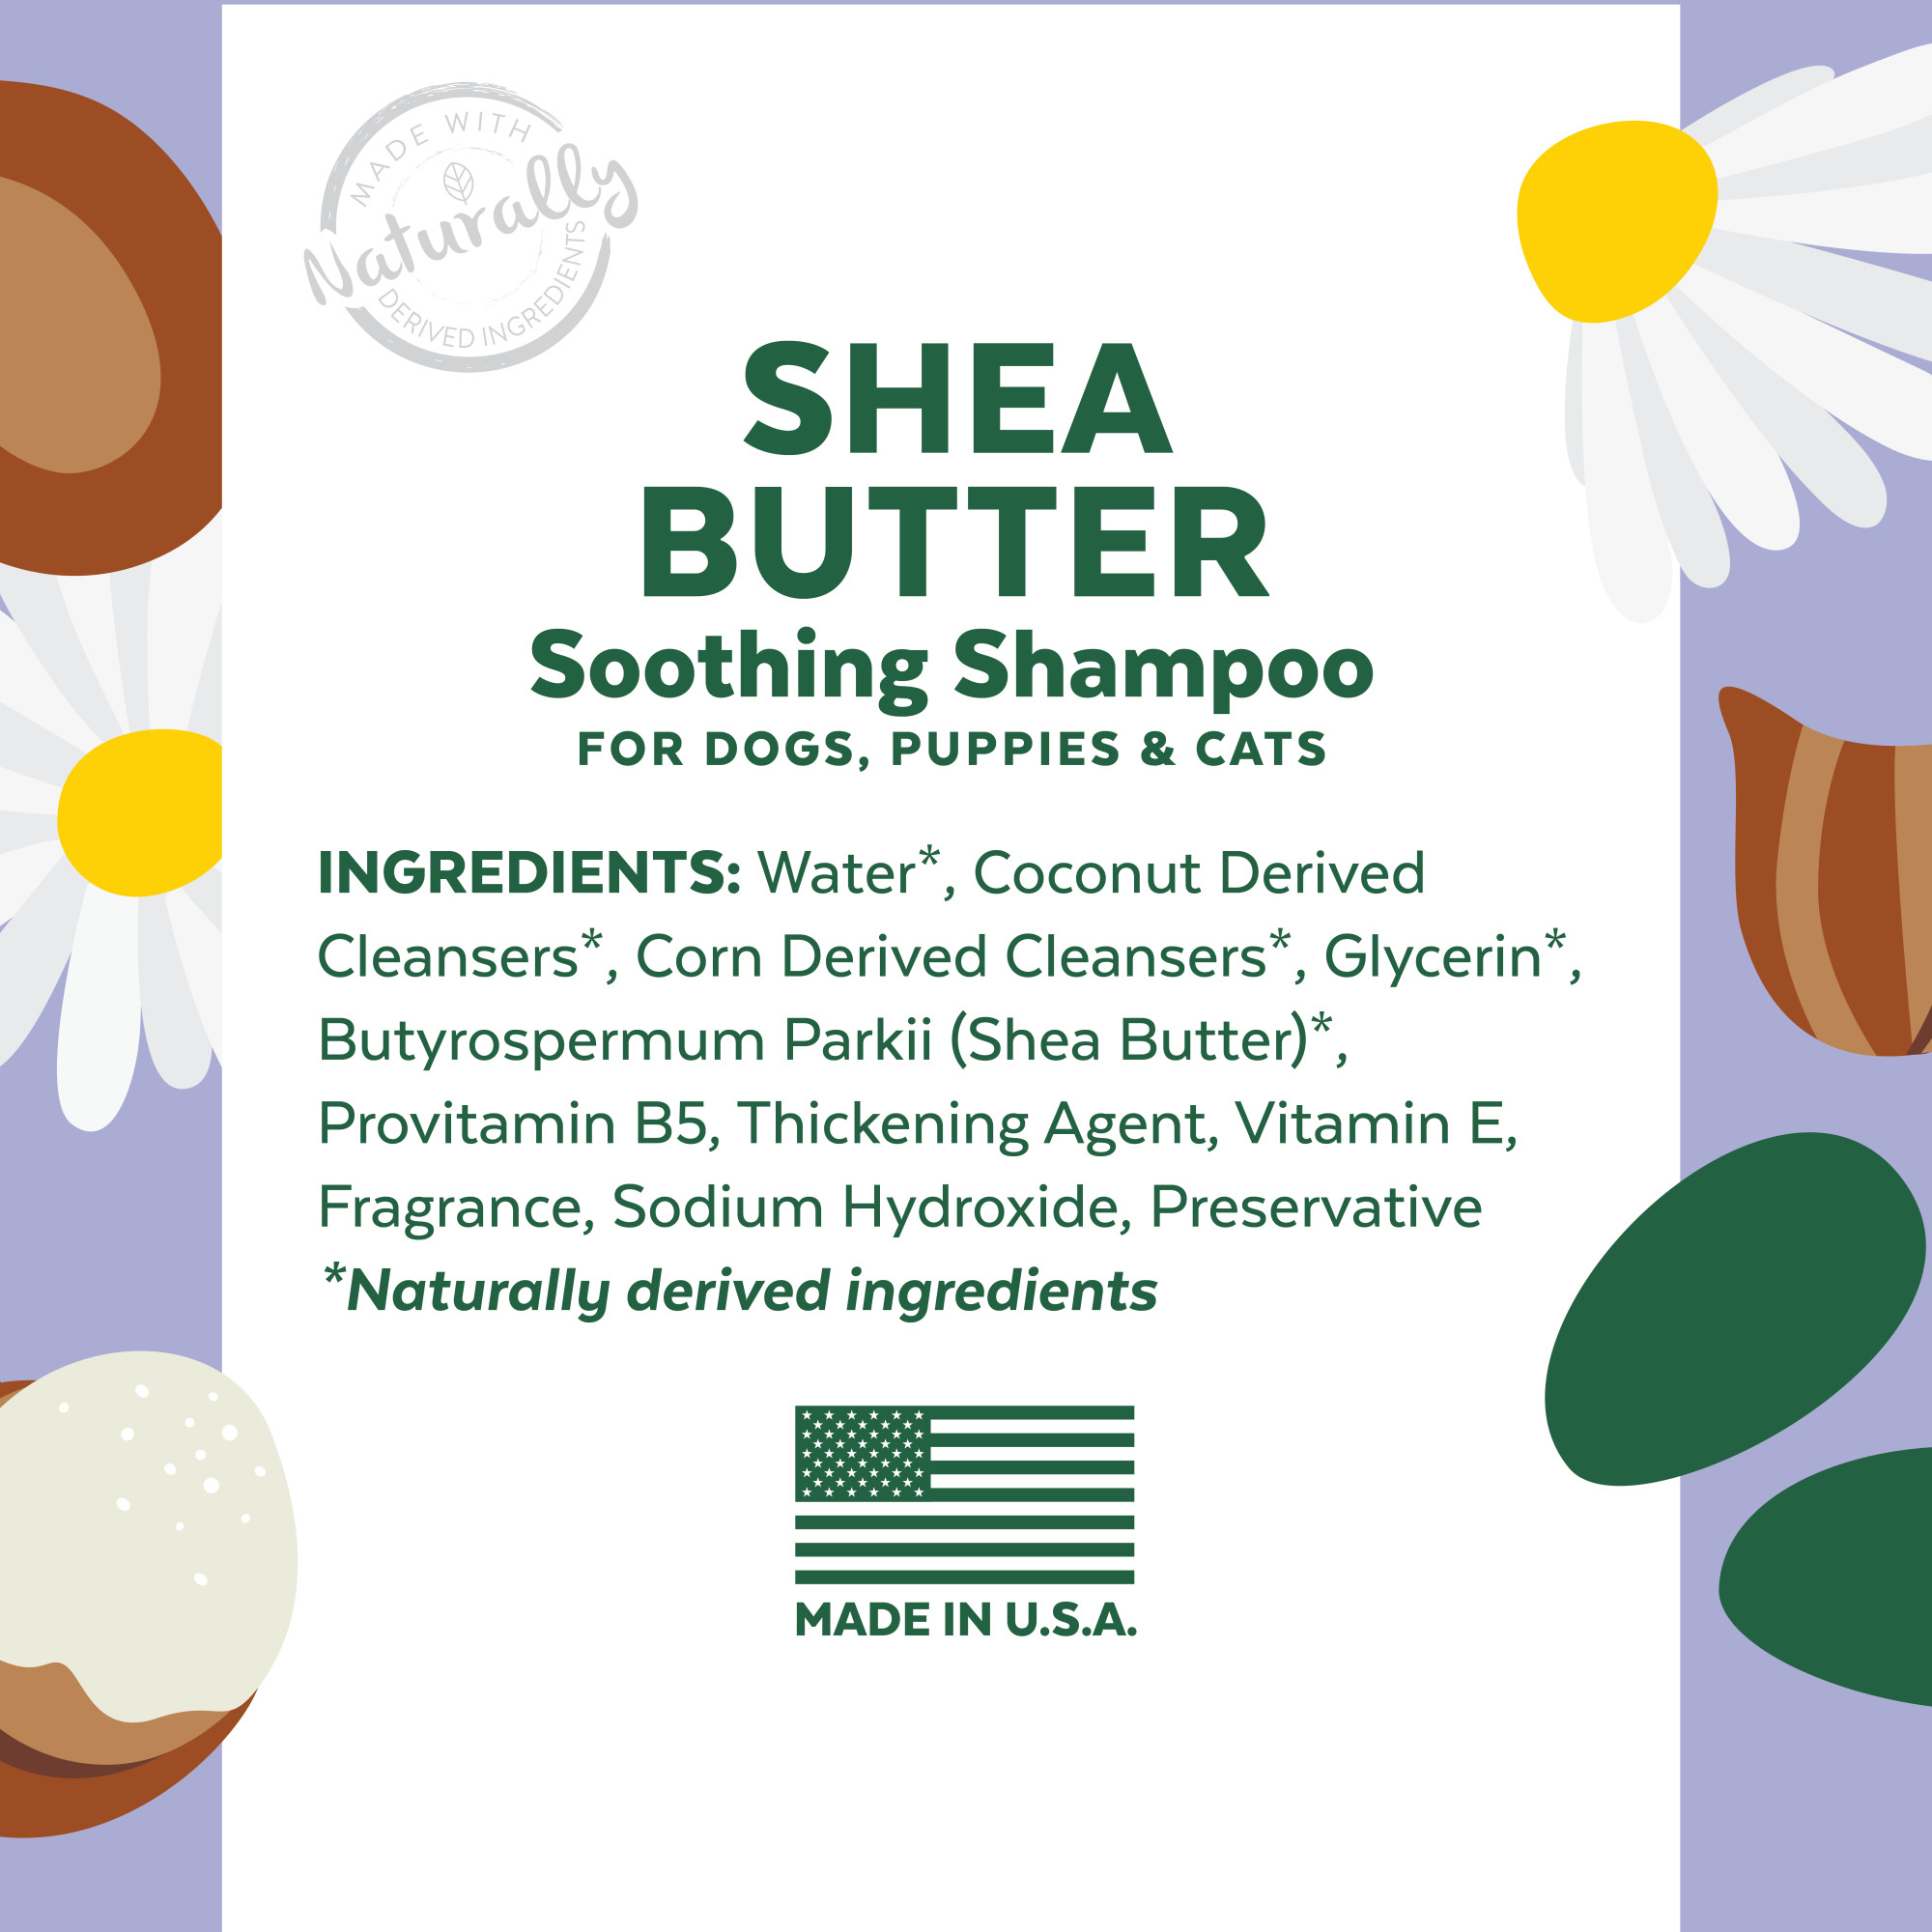 Shea Butter Soothing Shampoo for Dogs, Puppies & Cats